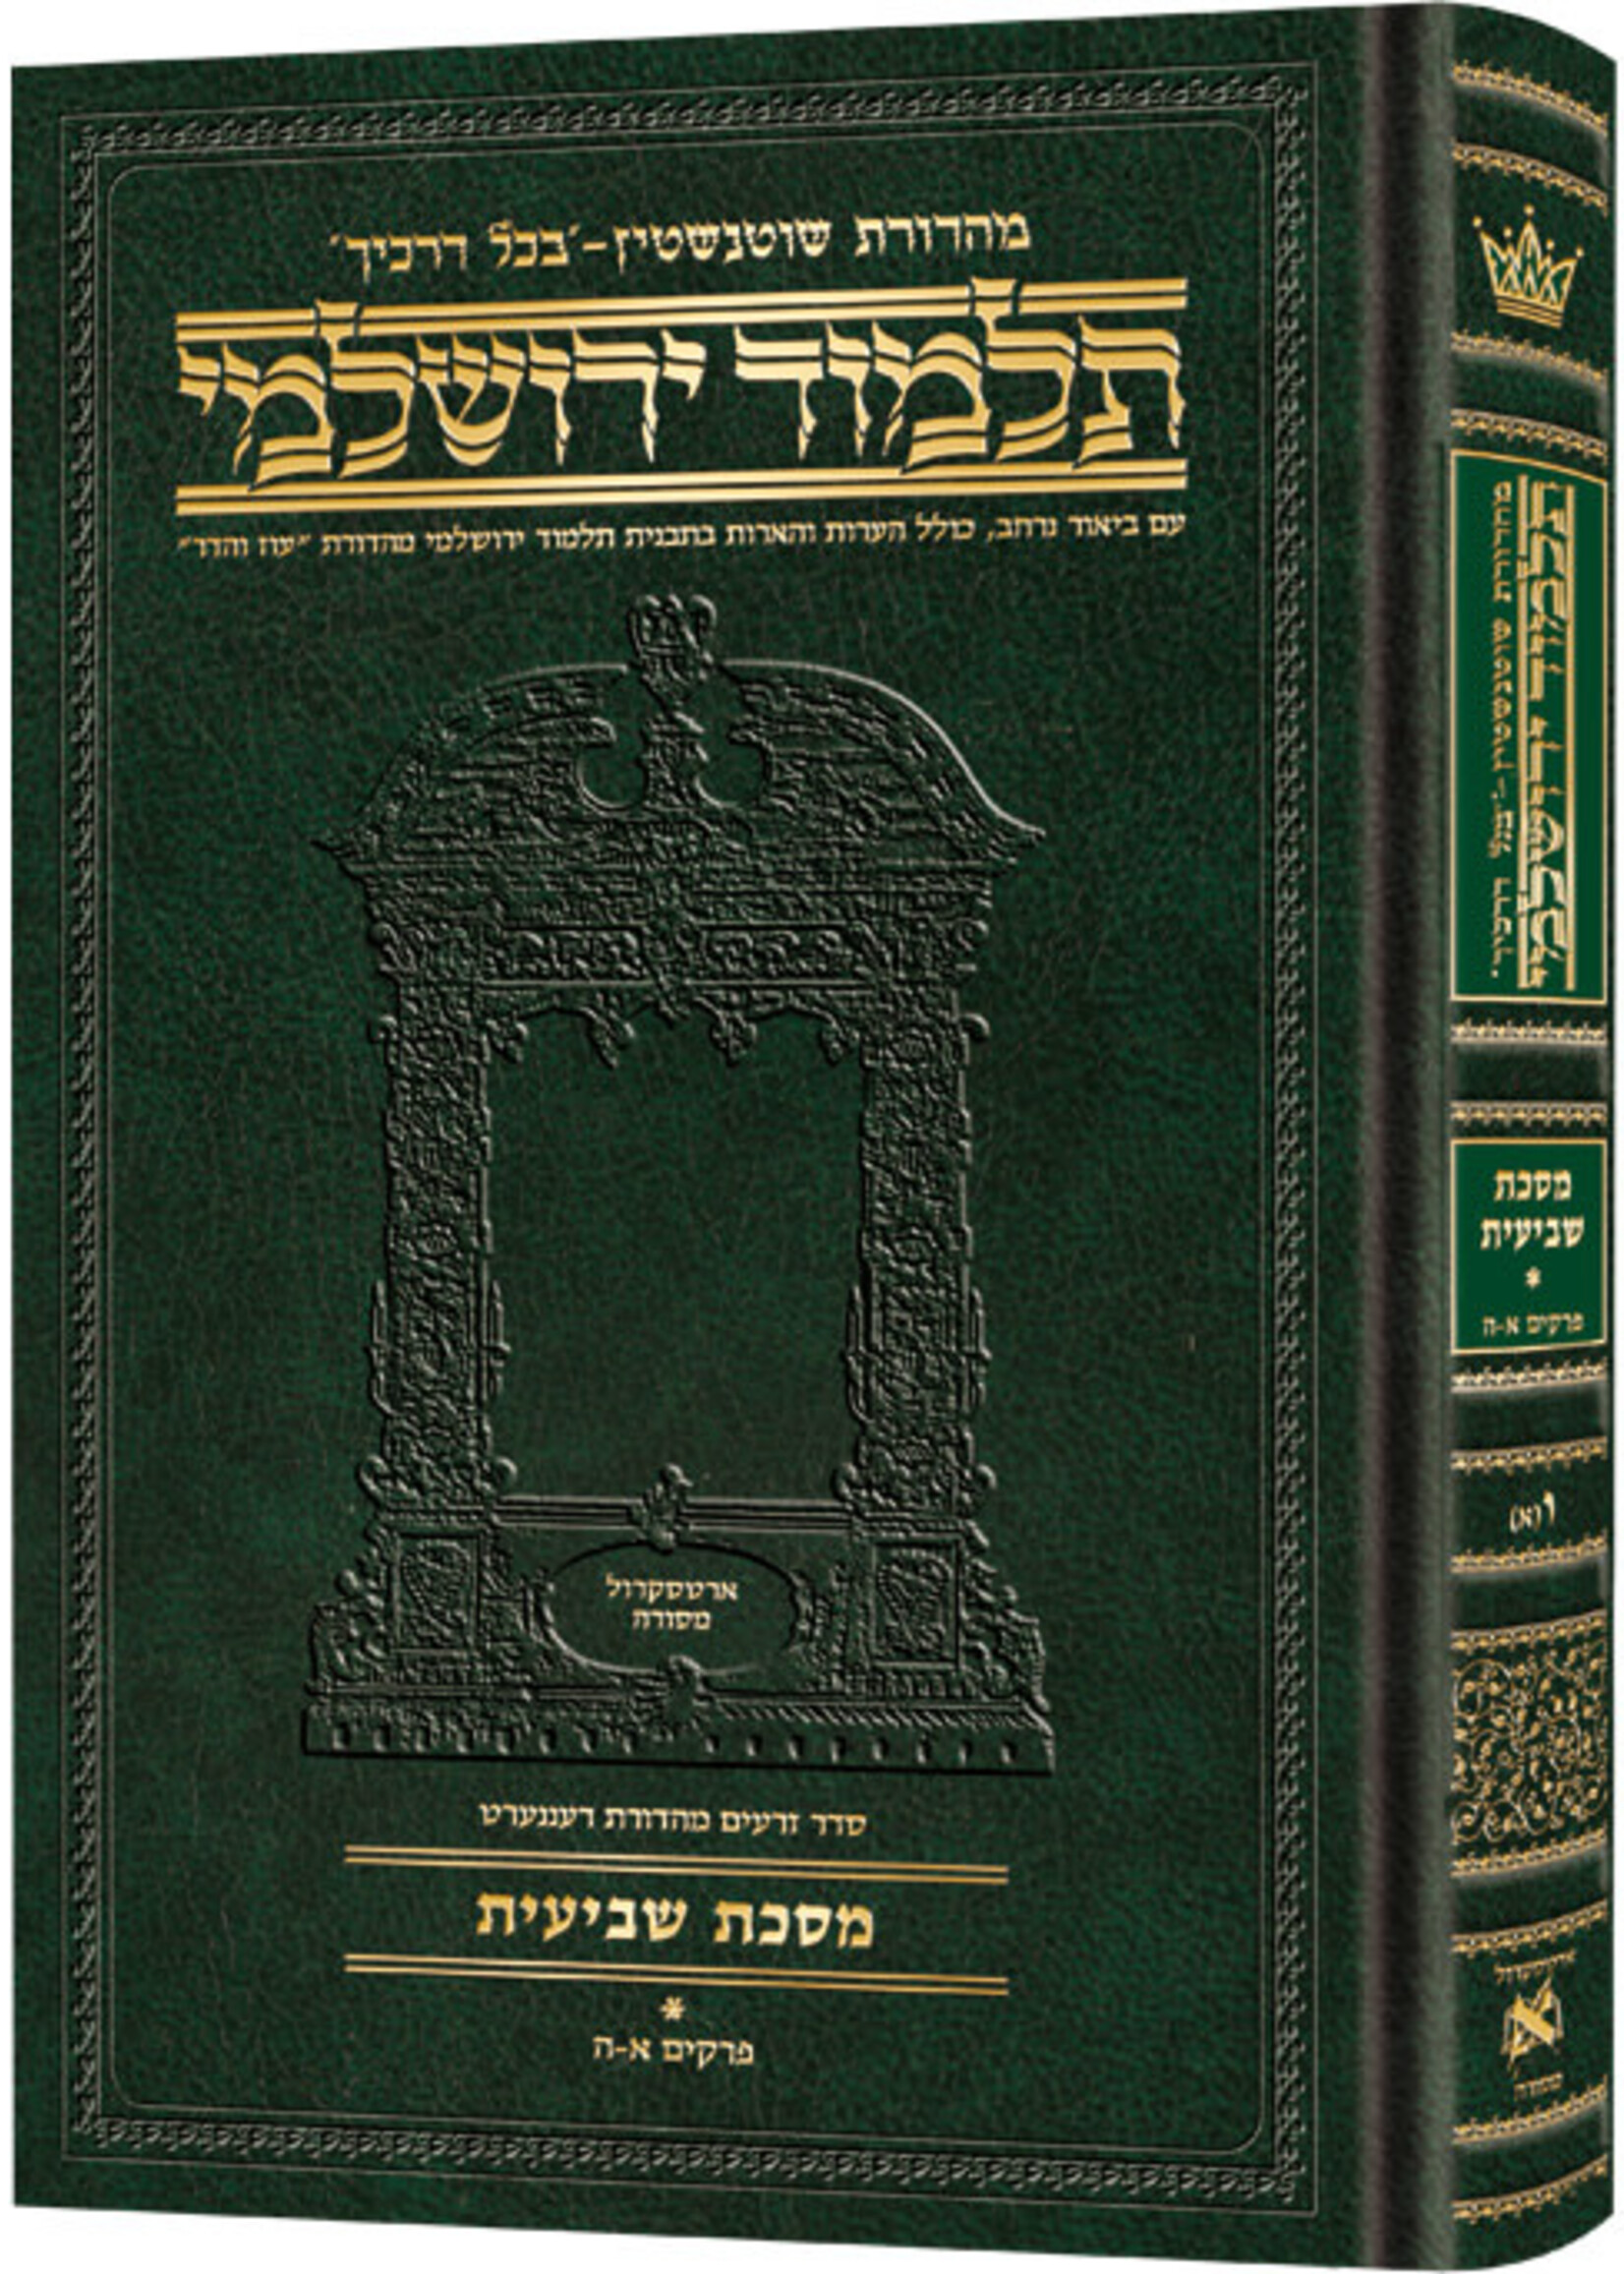 Schottenstein Talmud Yerushalmi - Hebrew Edition Compact Size - Tractate Shevi'is 2 (Daf Yomi Size)